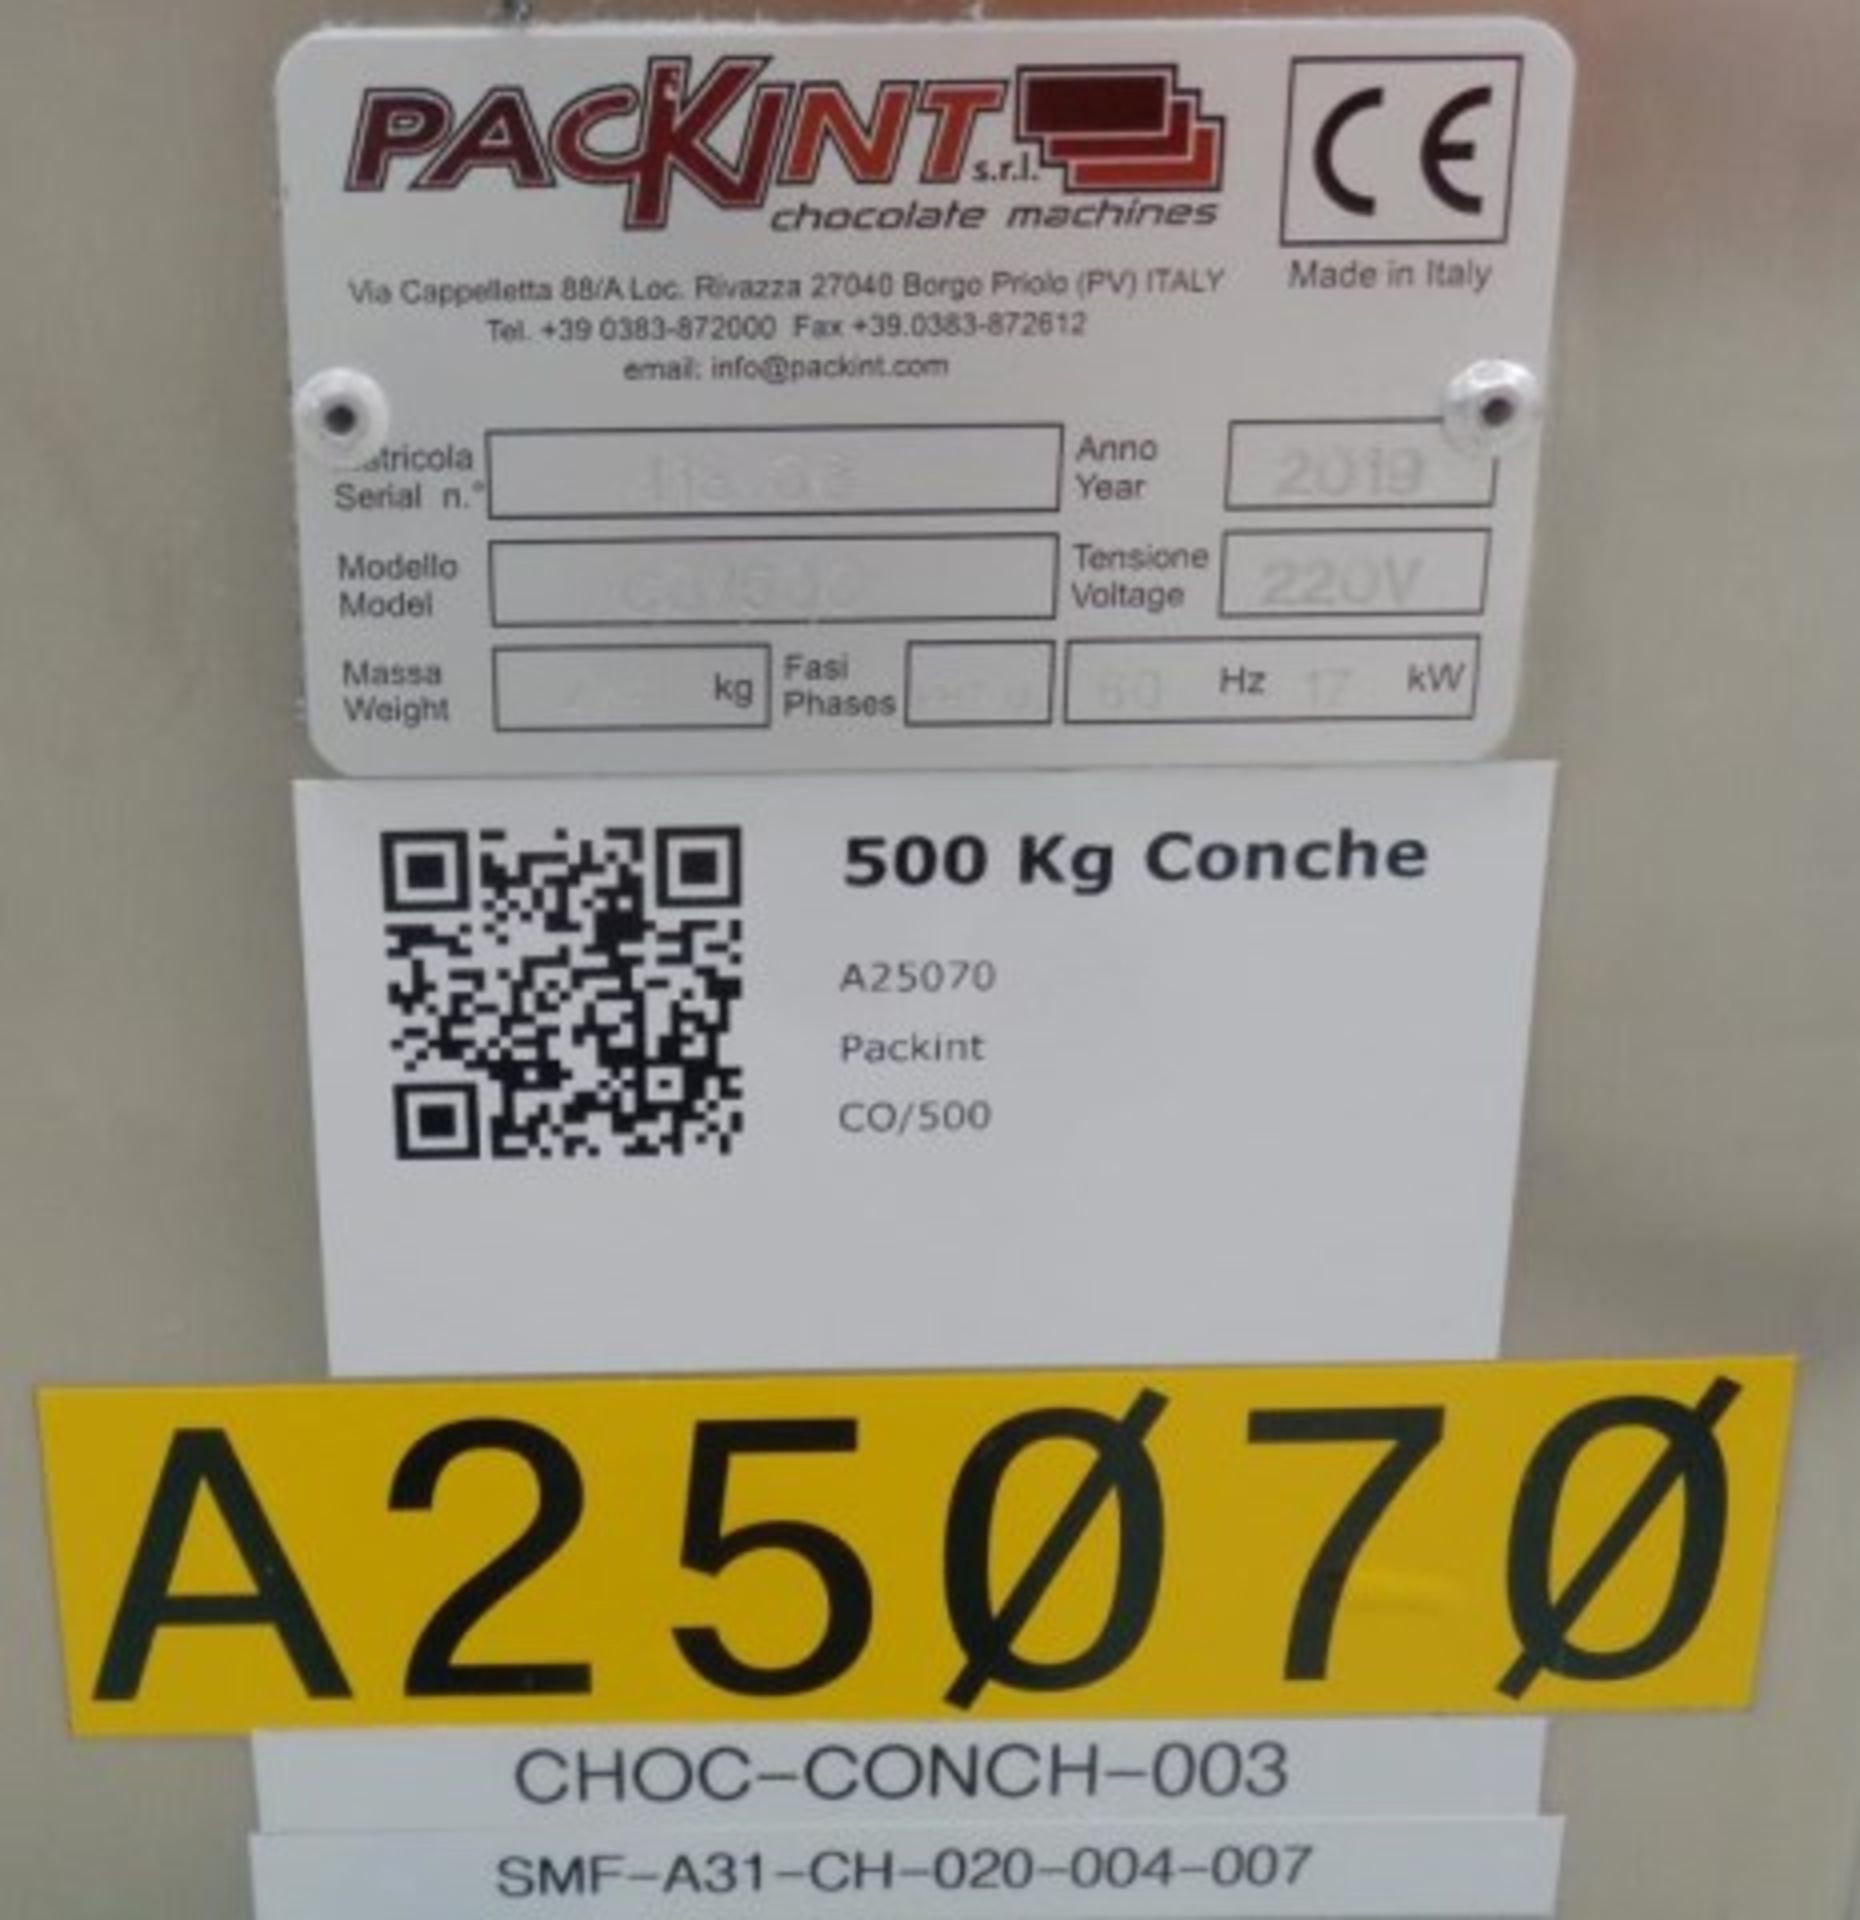 Stainless Steel 500 kg Jacketed Conche - Image 3 of 12